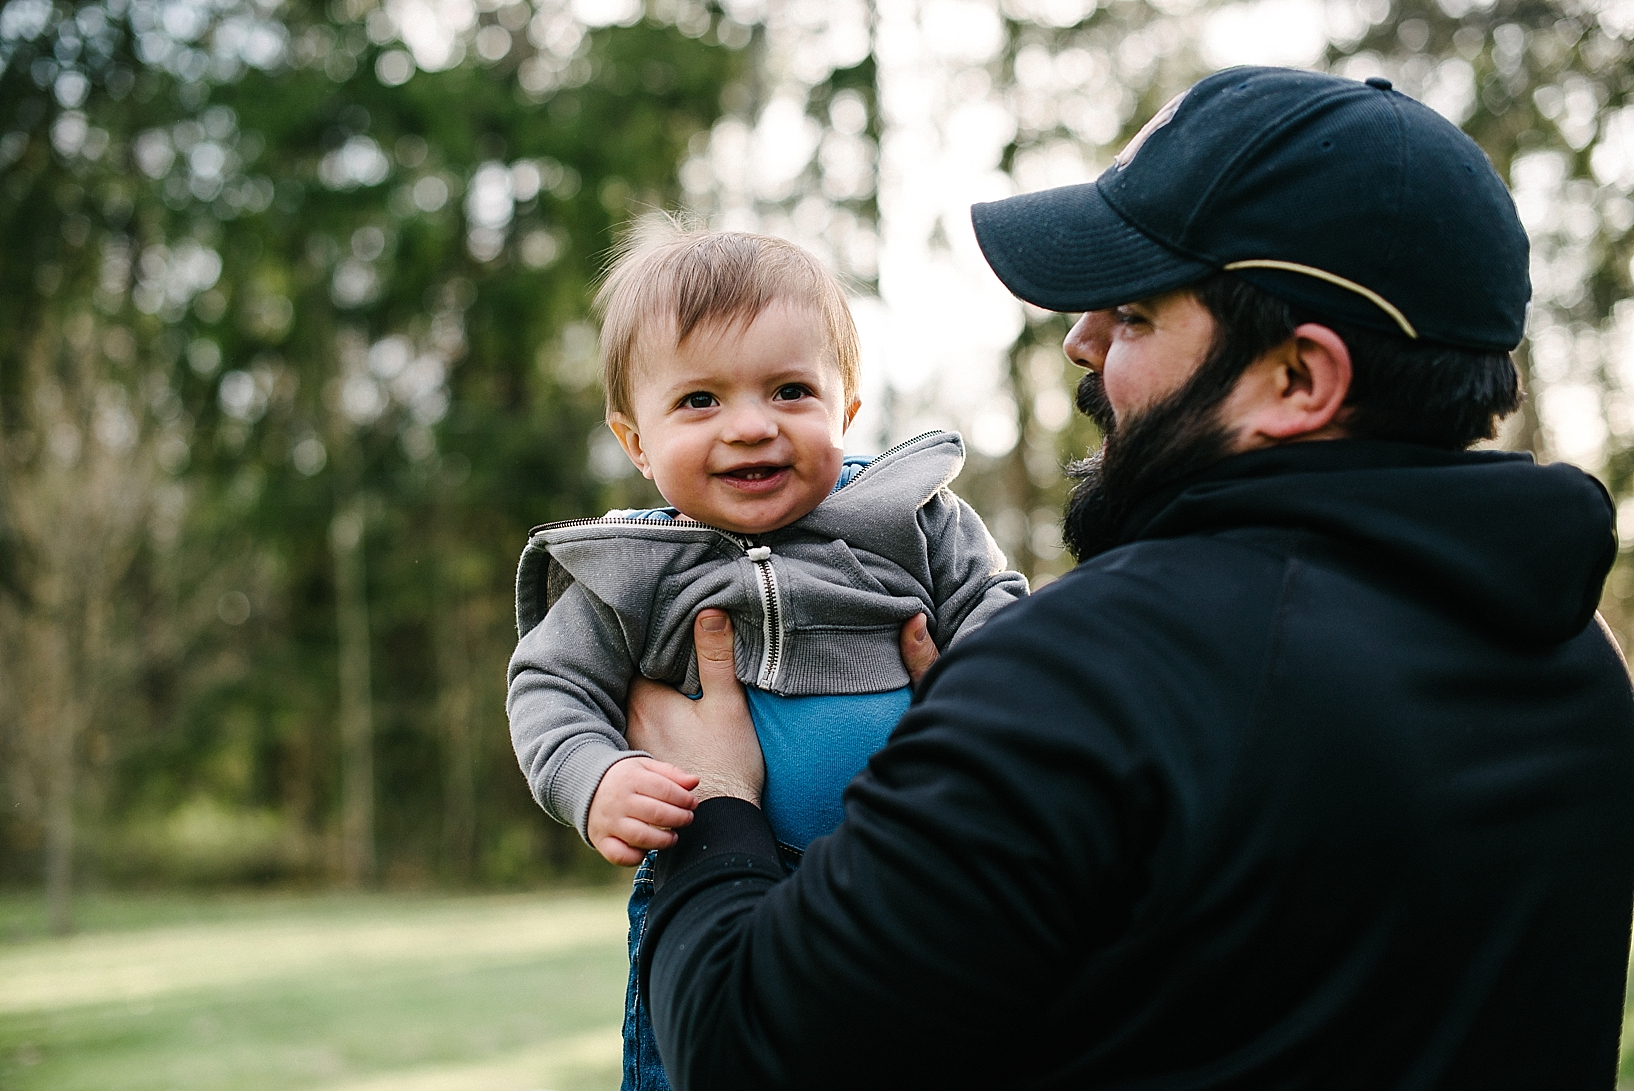 dad with beard wearing baseball hat holding son and smiling